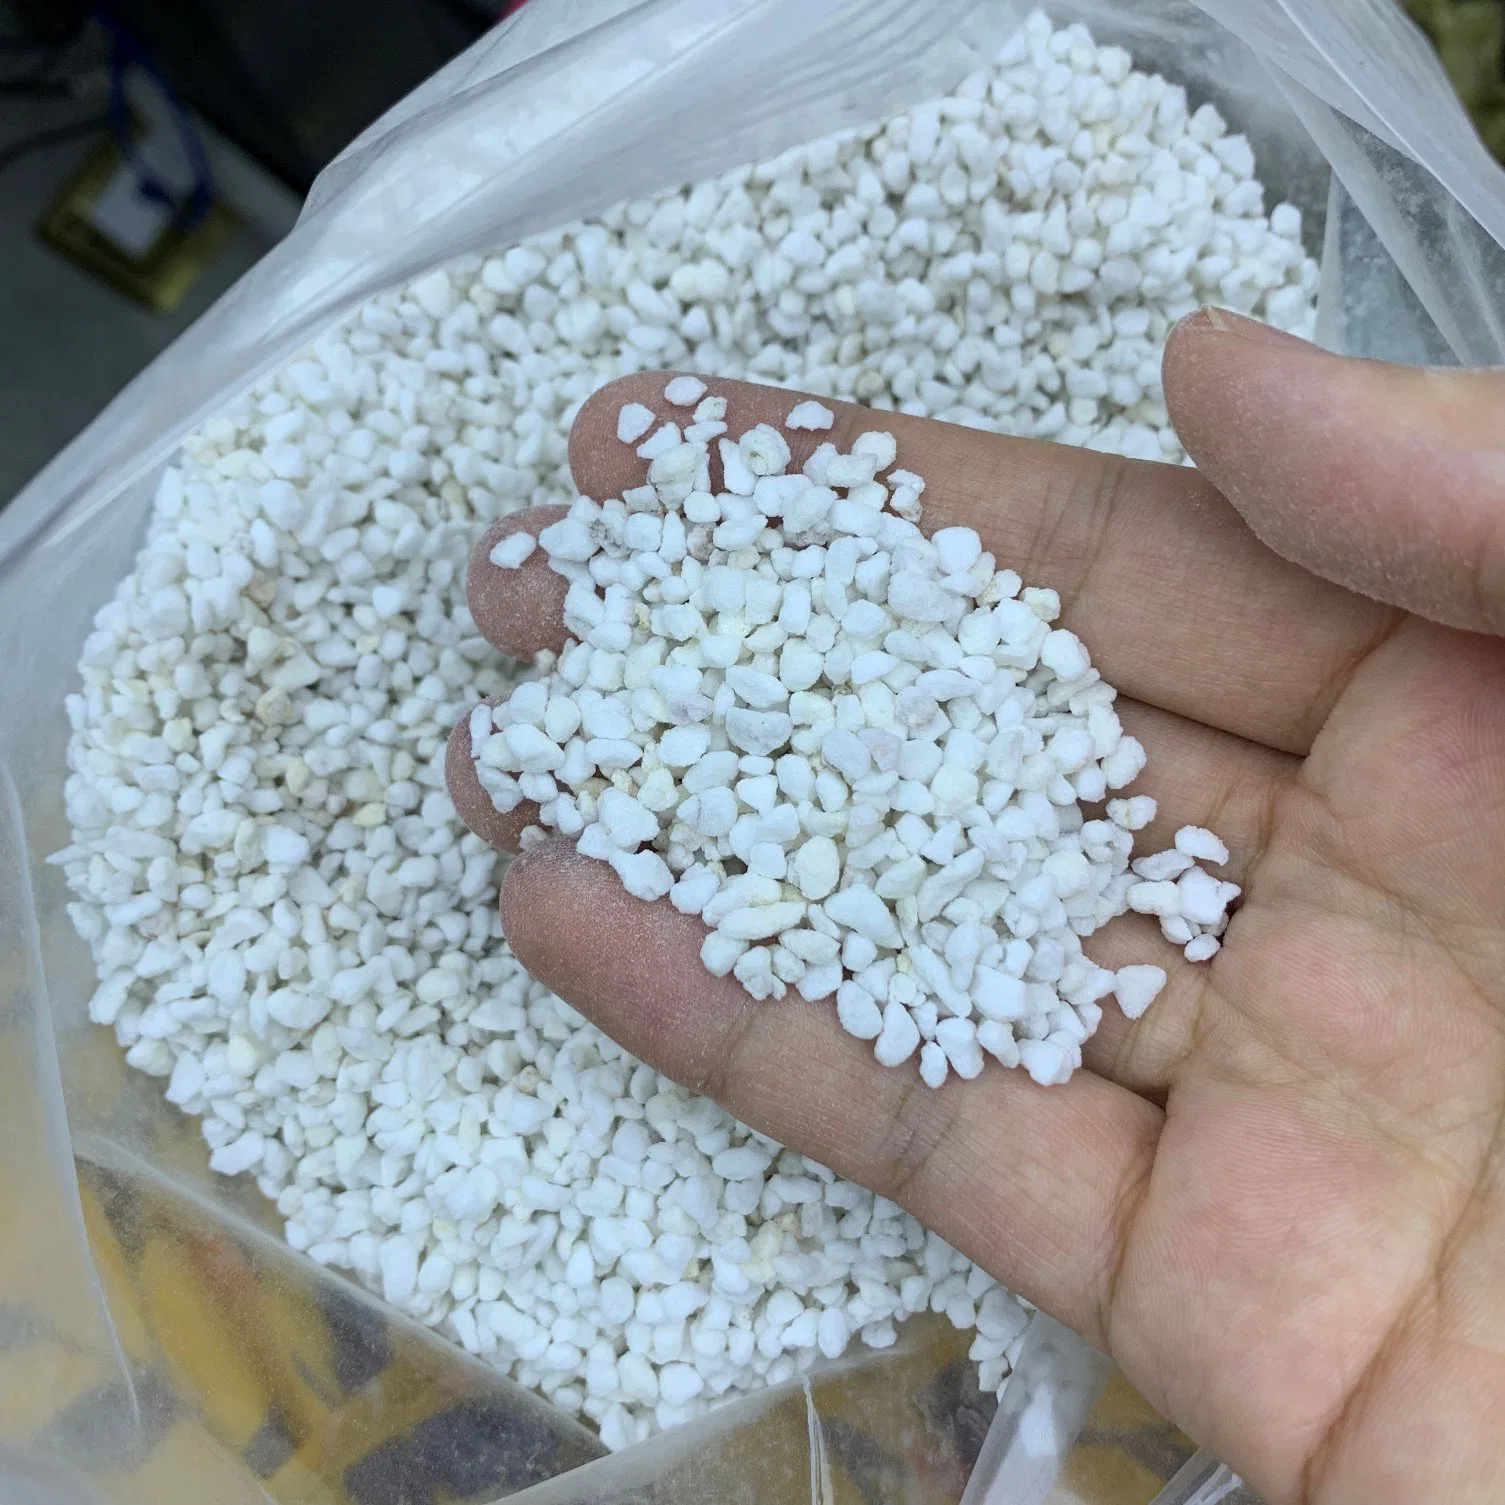 Bulk Agricultural and Hydroponic Plants Expanded Perlite Agriculture